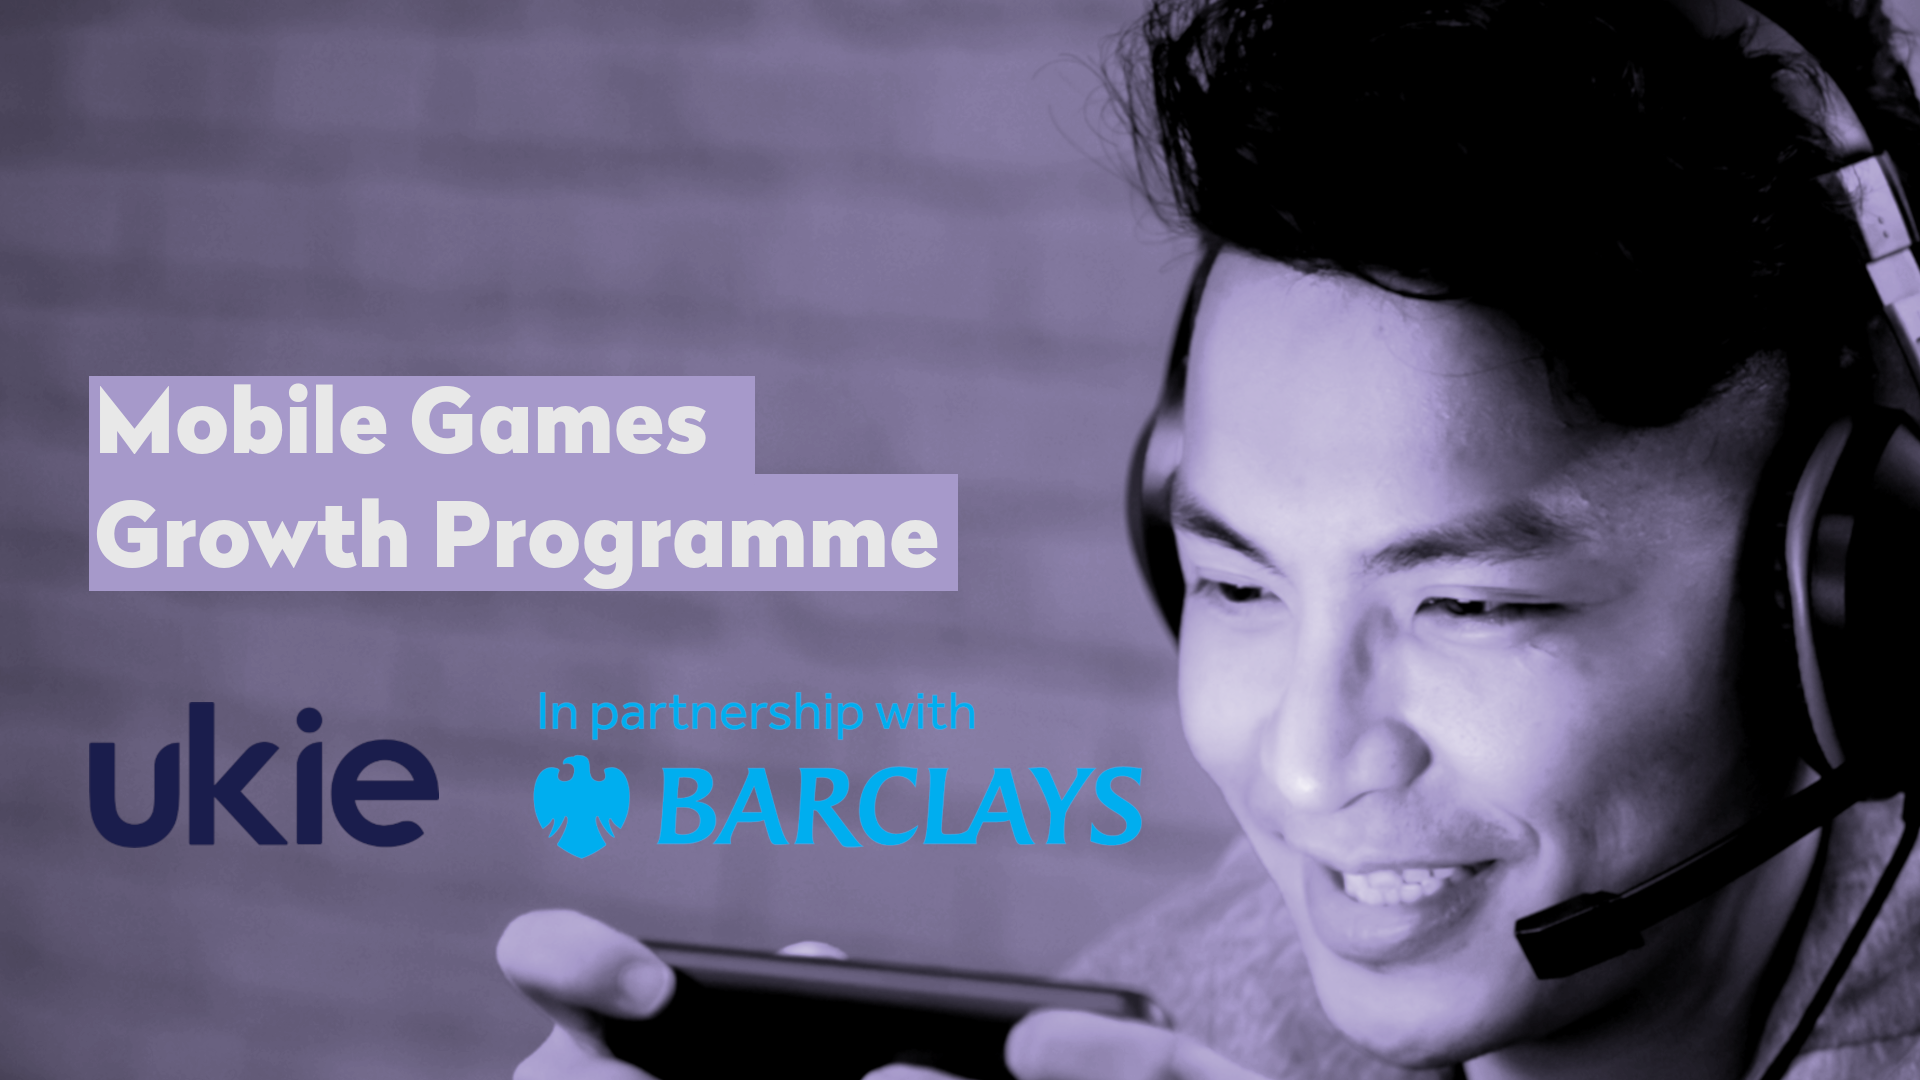 Barclays x Ukie Mobile Games Growth Programme